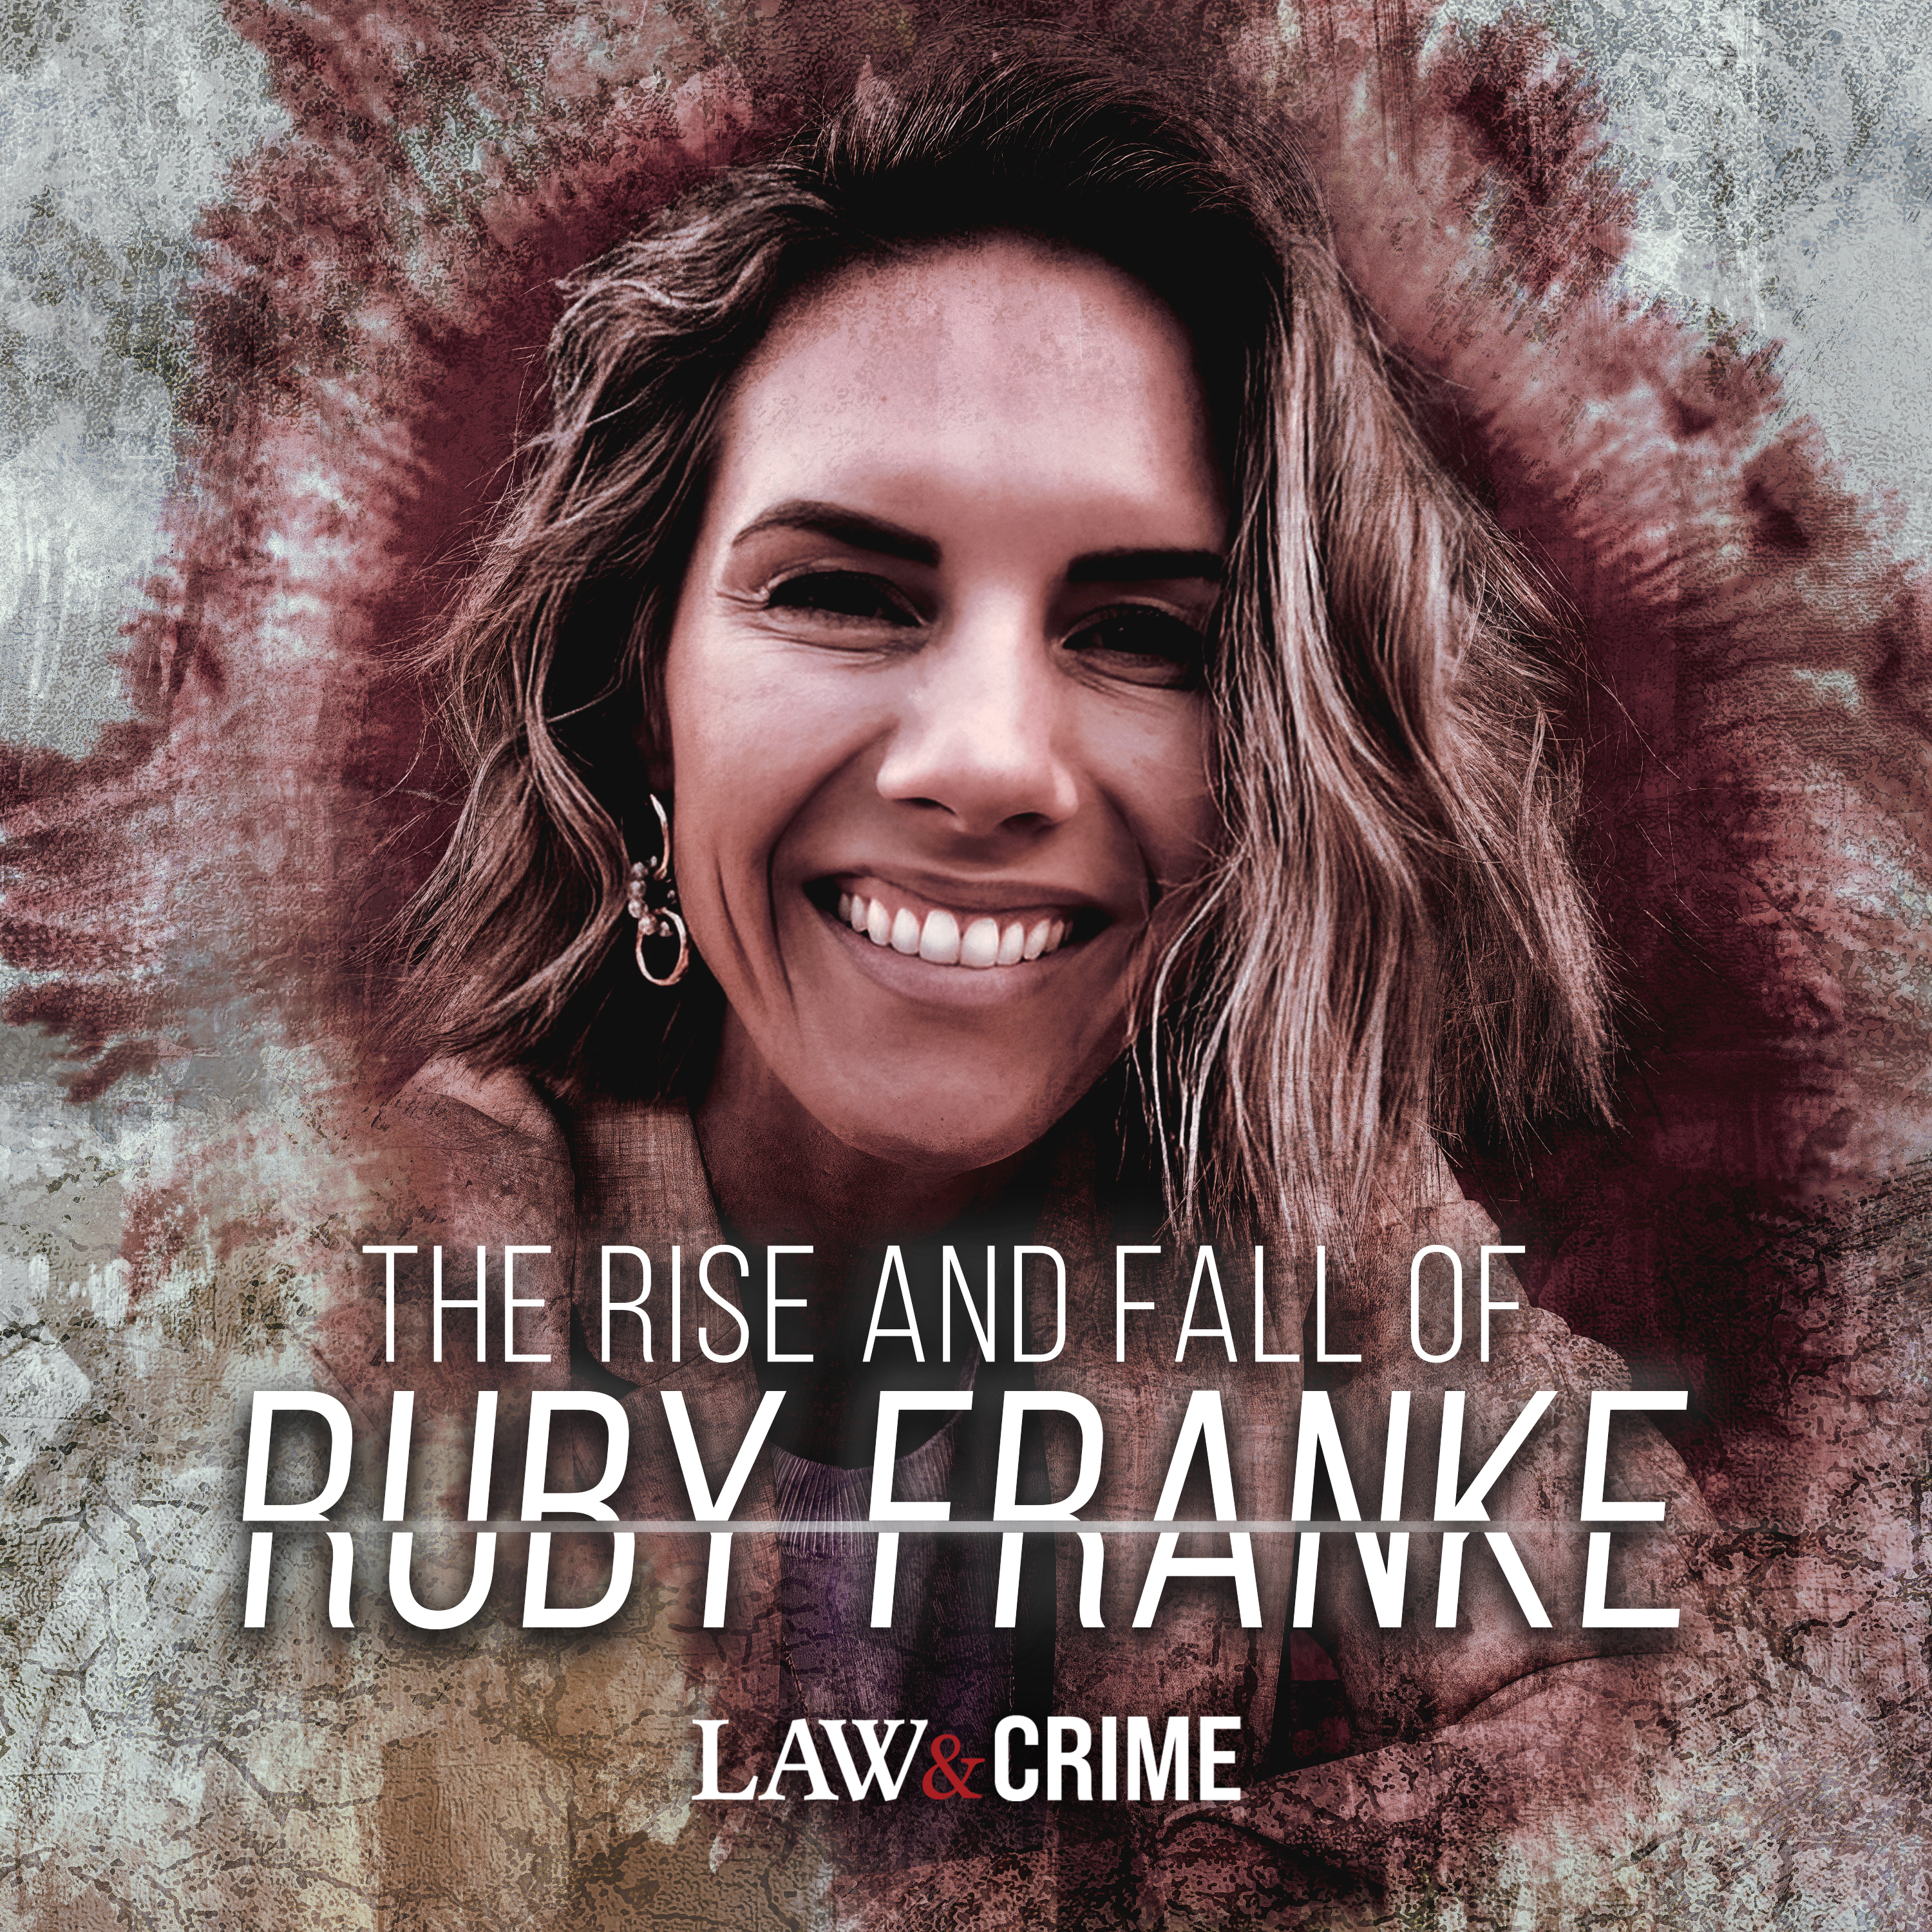 Introducing: The Rise and Fall of Ruby Franke by Law&Crime | Wondery